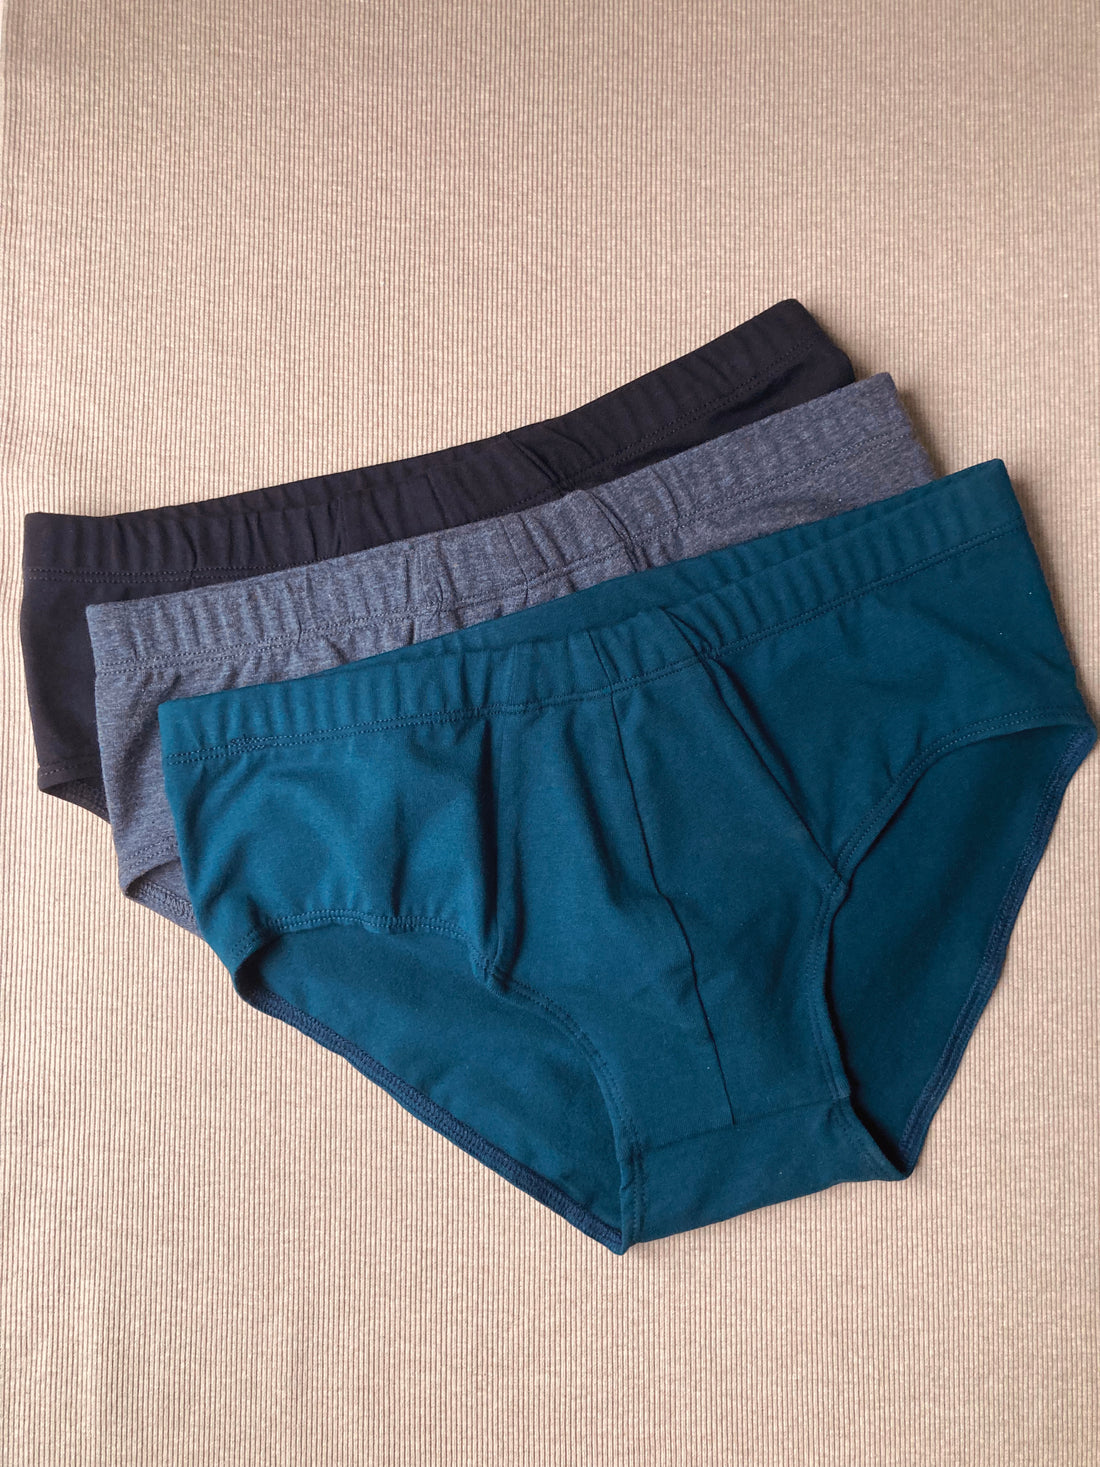 20 Pairs Of Comfortable Underwear To Shop Now - Chatelaine